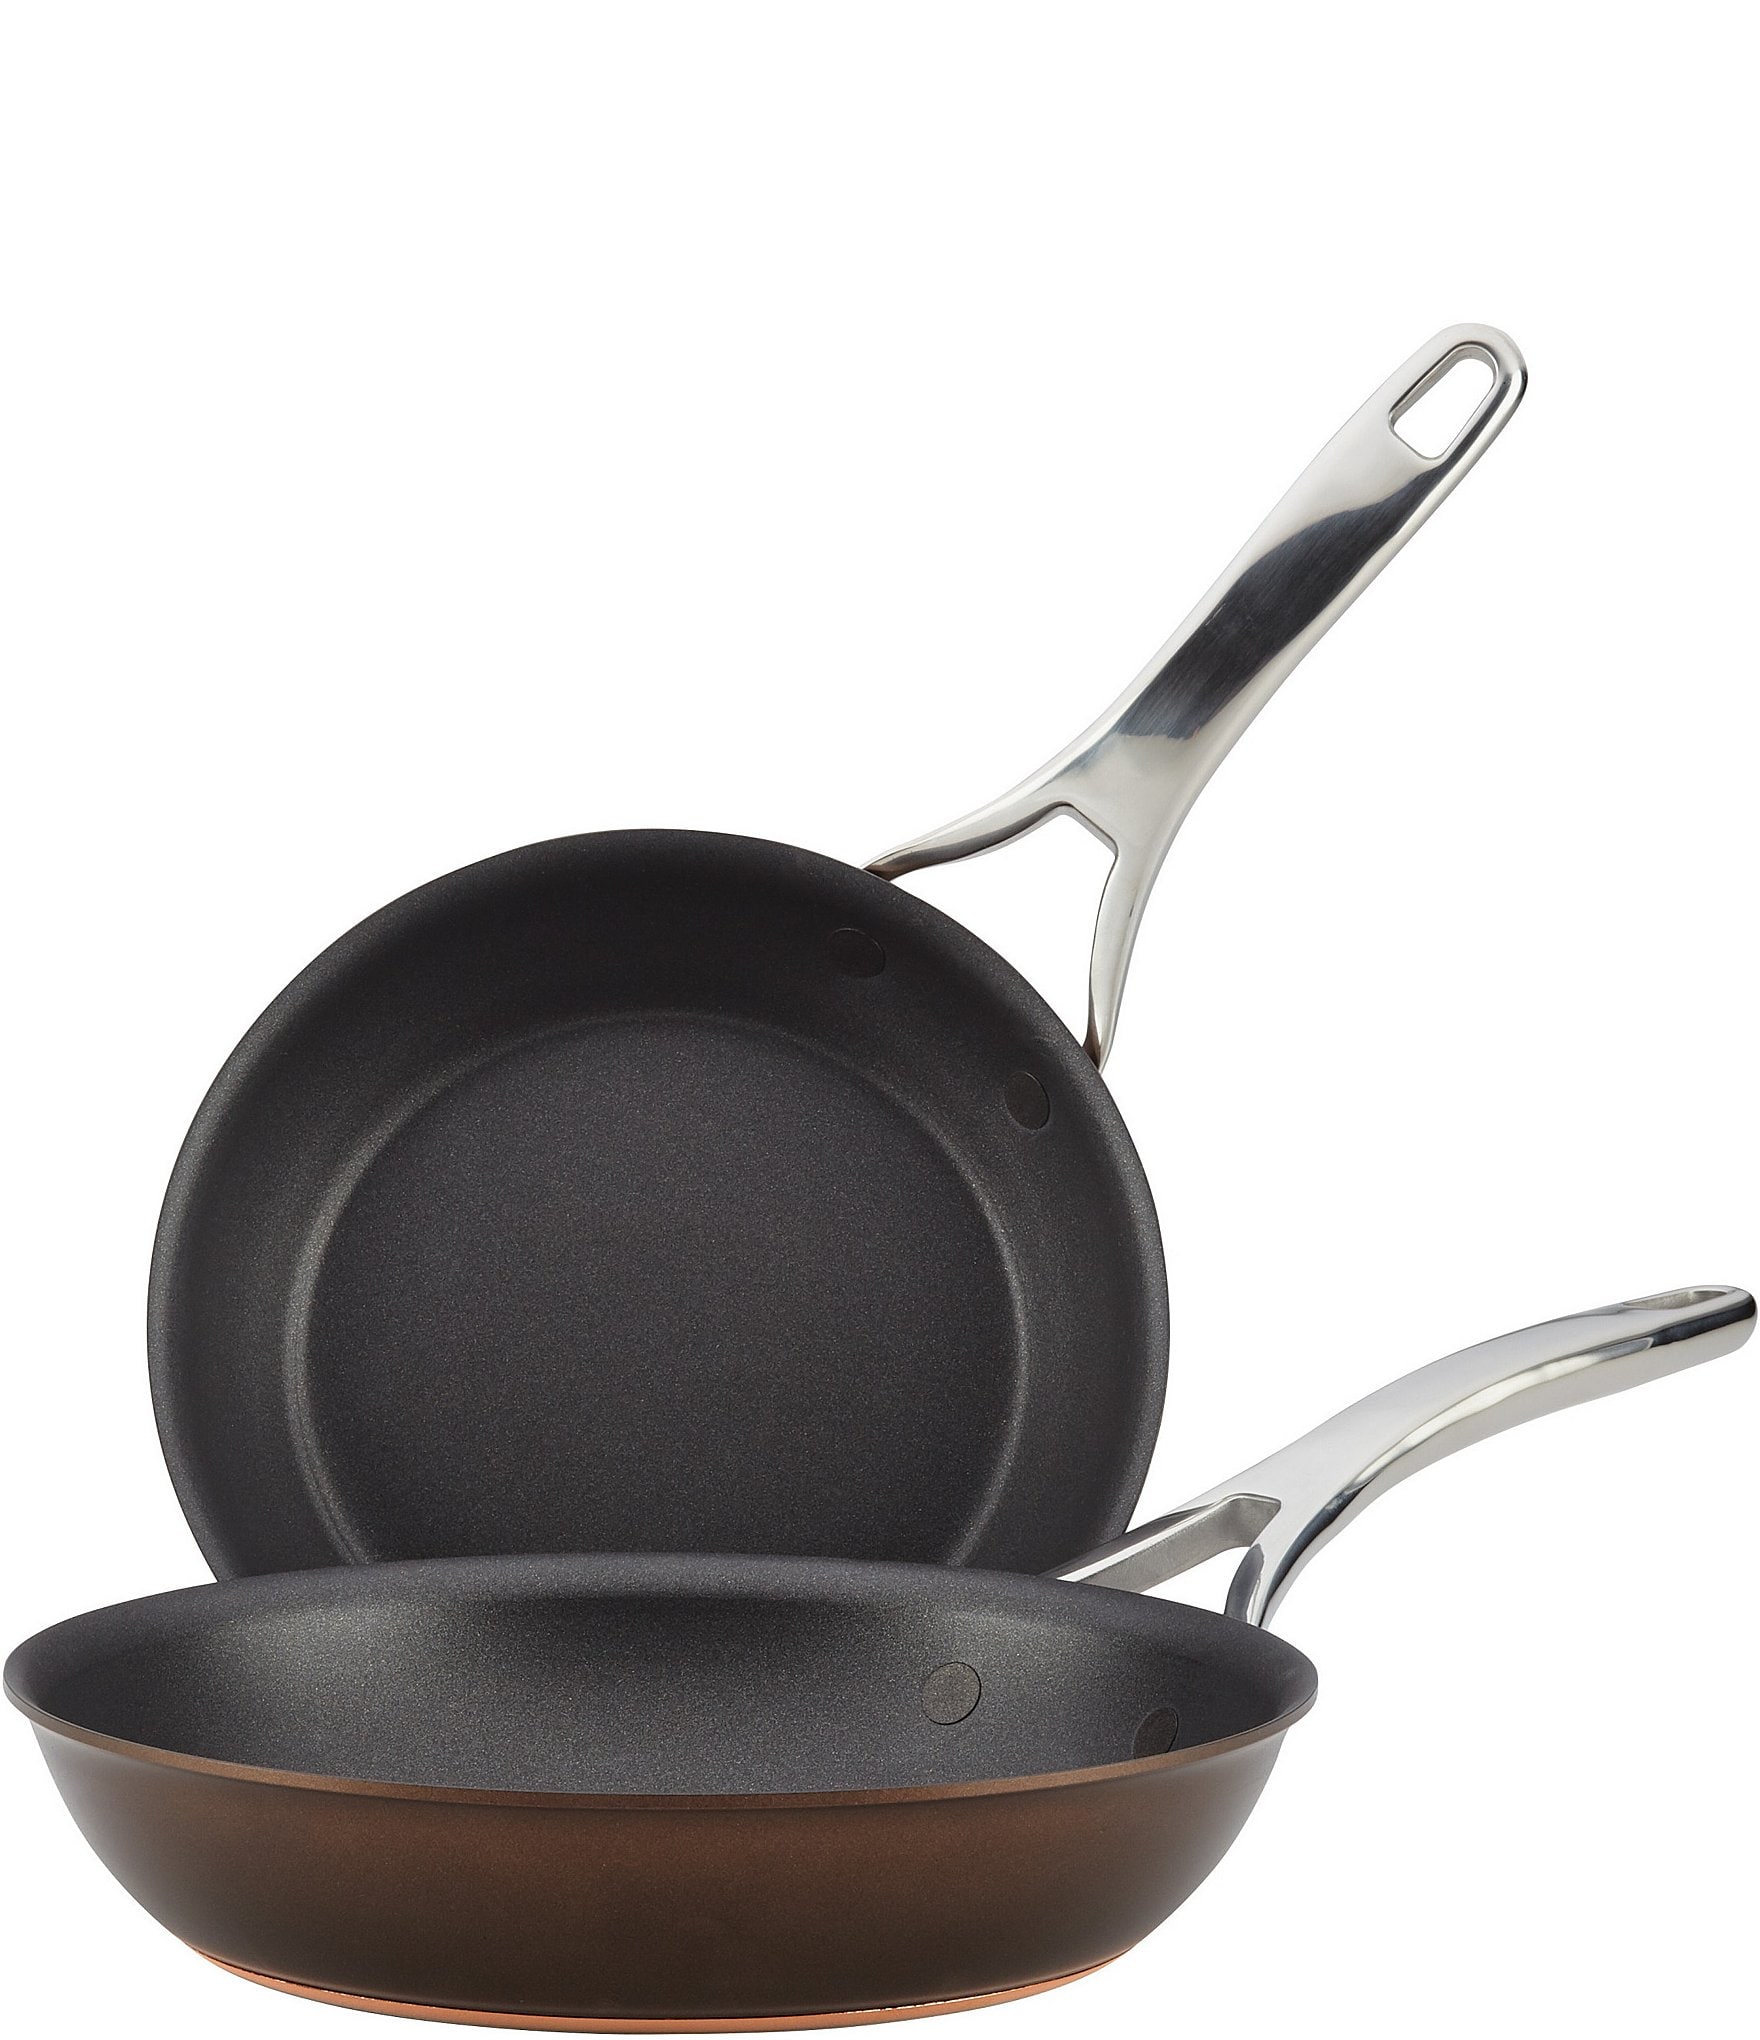 https://dimg.dillards.com/is/image/DillardsZoom/zoom/anolon-nouvelle-copper-luxe-hard-anodized-nonstick-skillet-twin-pack/20001729_zi.jpg